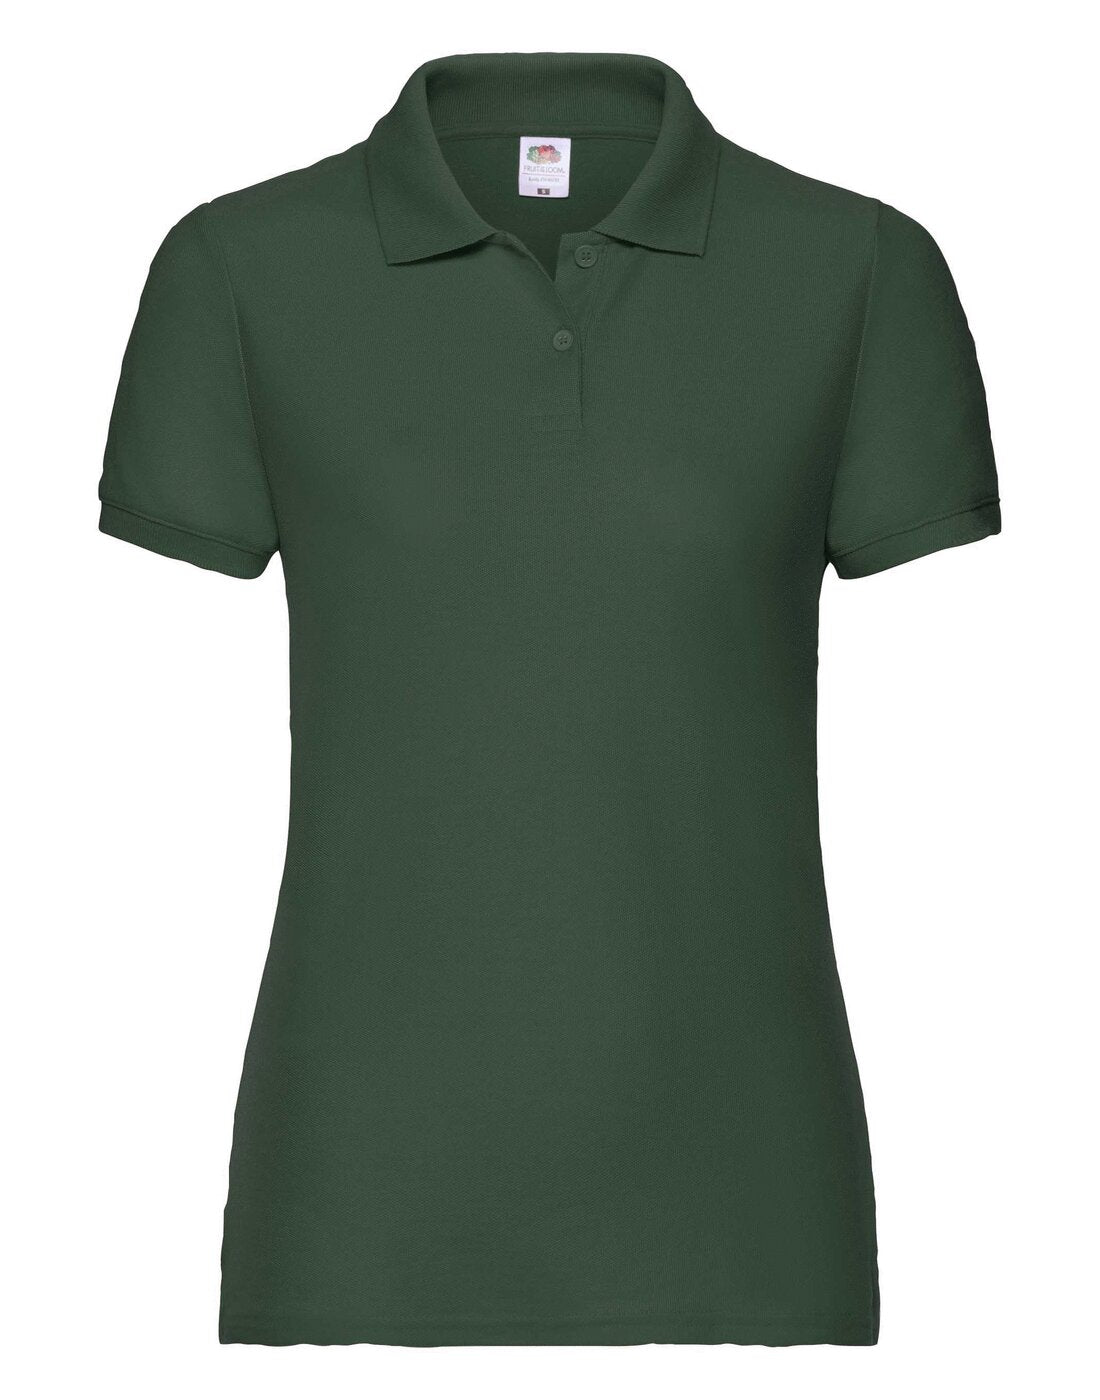 Fruit of the Loom Ladies 65/35 Polo - Bottle Green